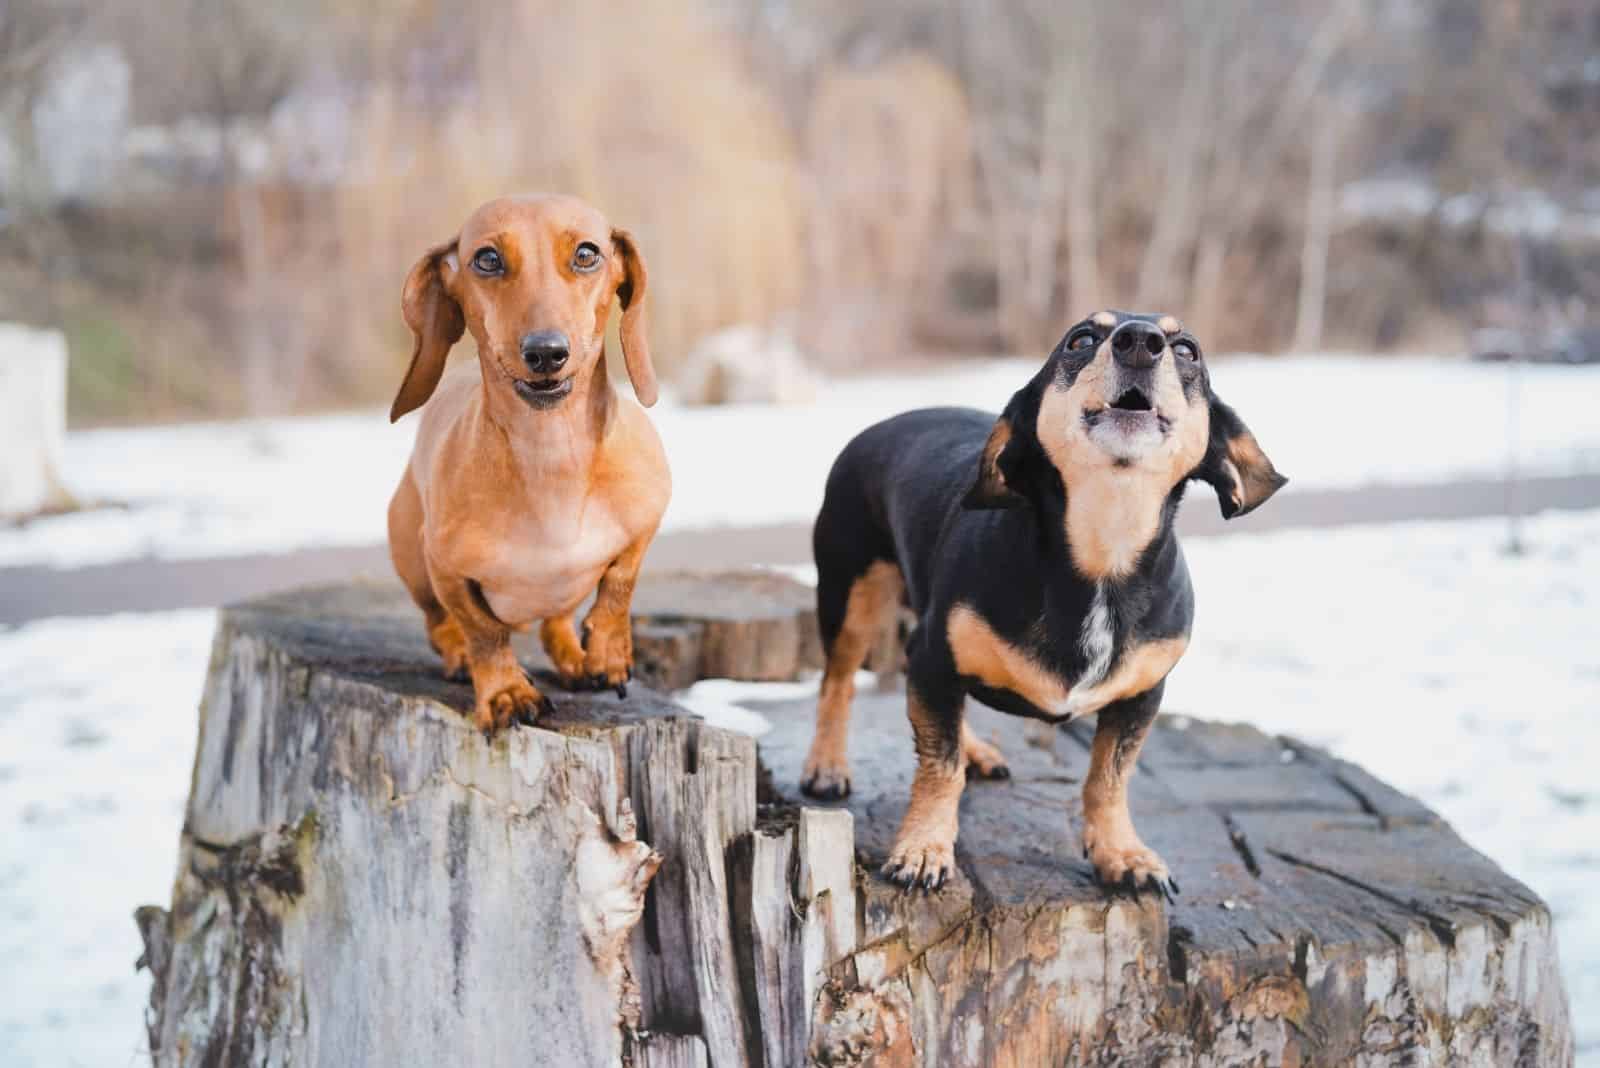 two cute dachshunds barking and standing on the bark of a tree